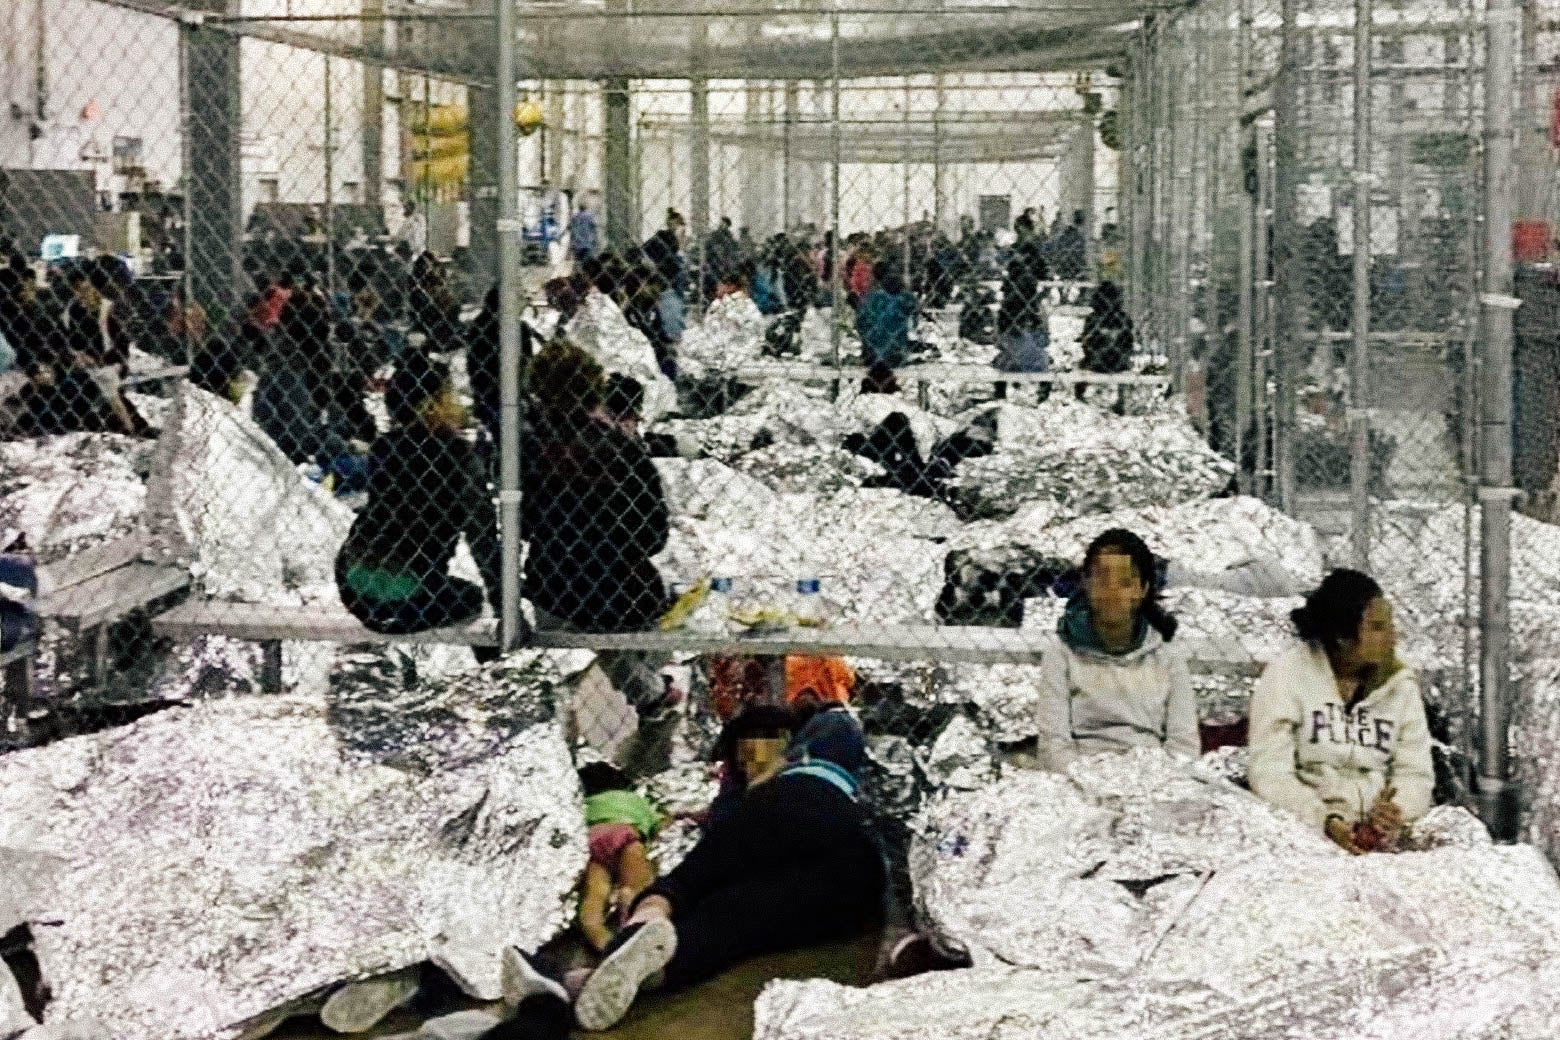 Migrants in a detention center.